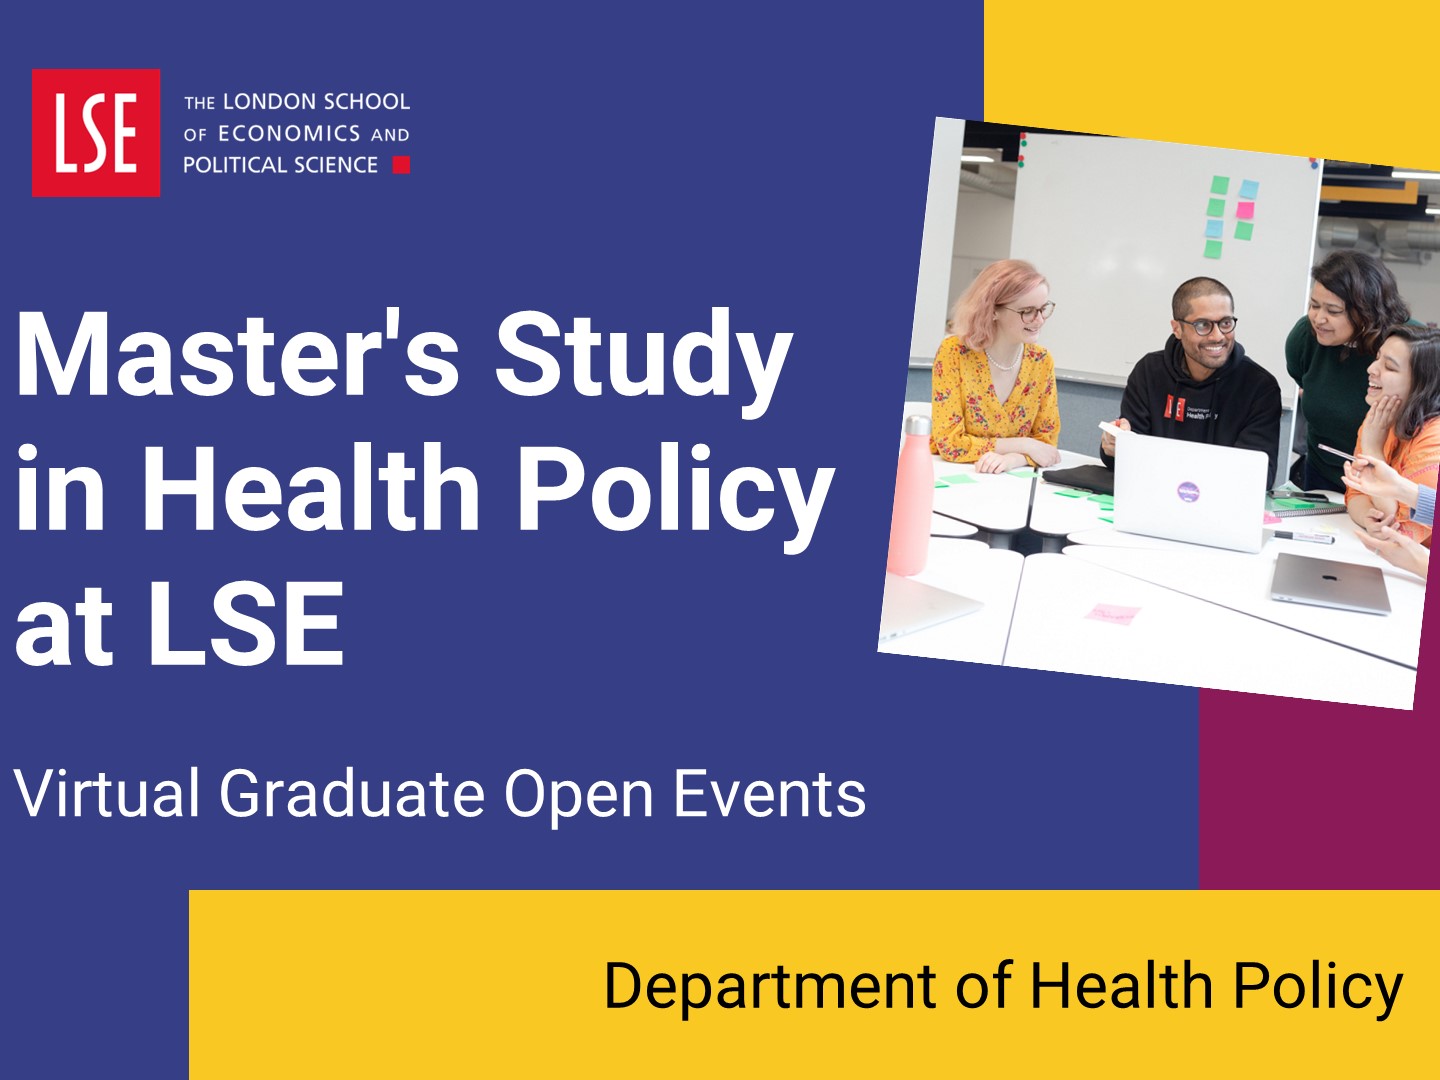 Introduction to master's study in Health Policy at LSE